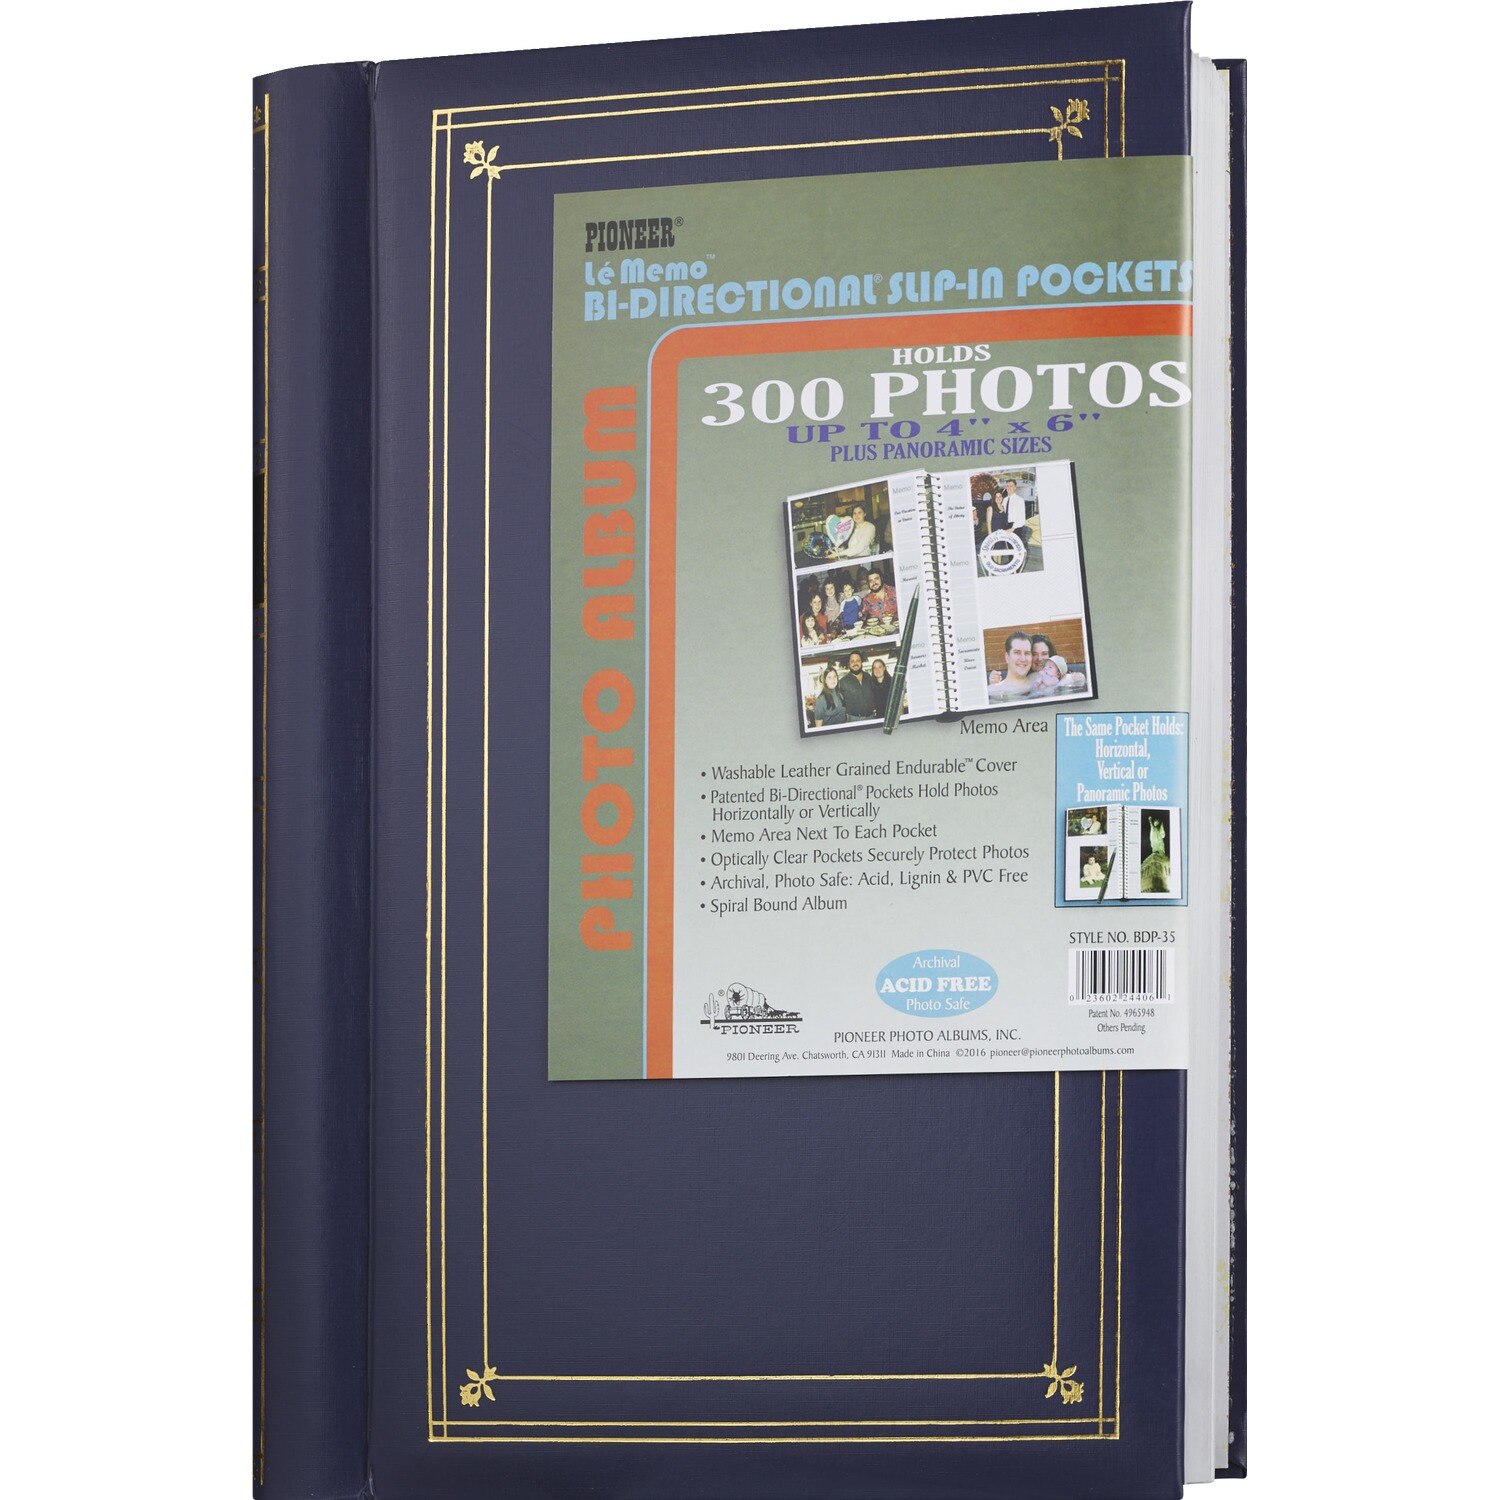 Pioneer Photo Albums Spiral Bound Album, 10" x 14", Holds 300 4x6 Photos, Assorted Colors